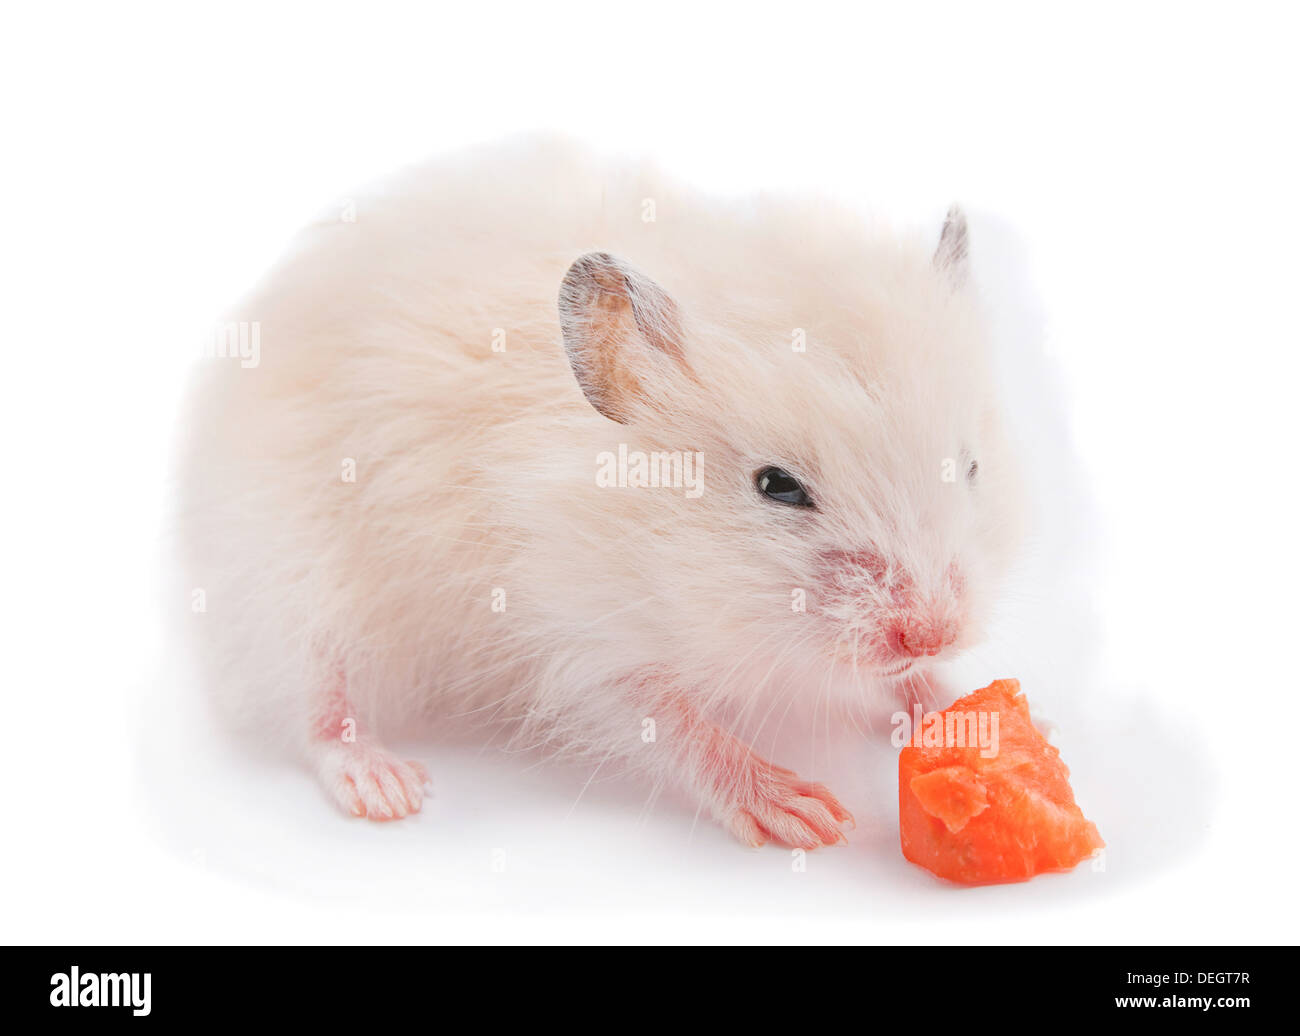 Baby hamster isolated on white eating carrot Stock Photo